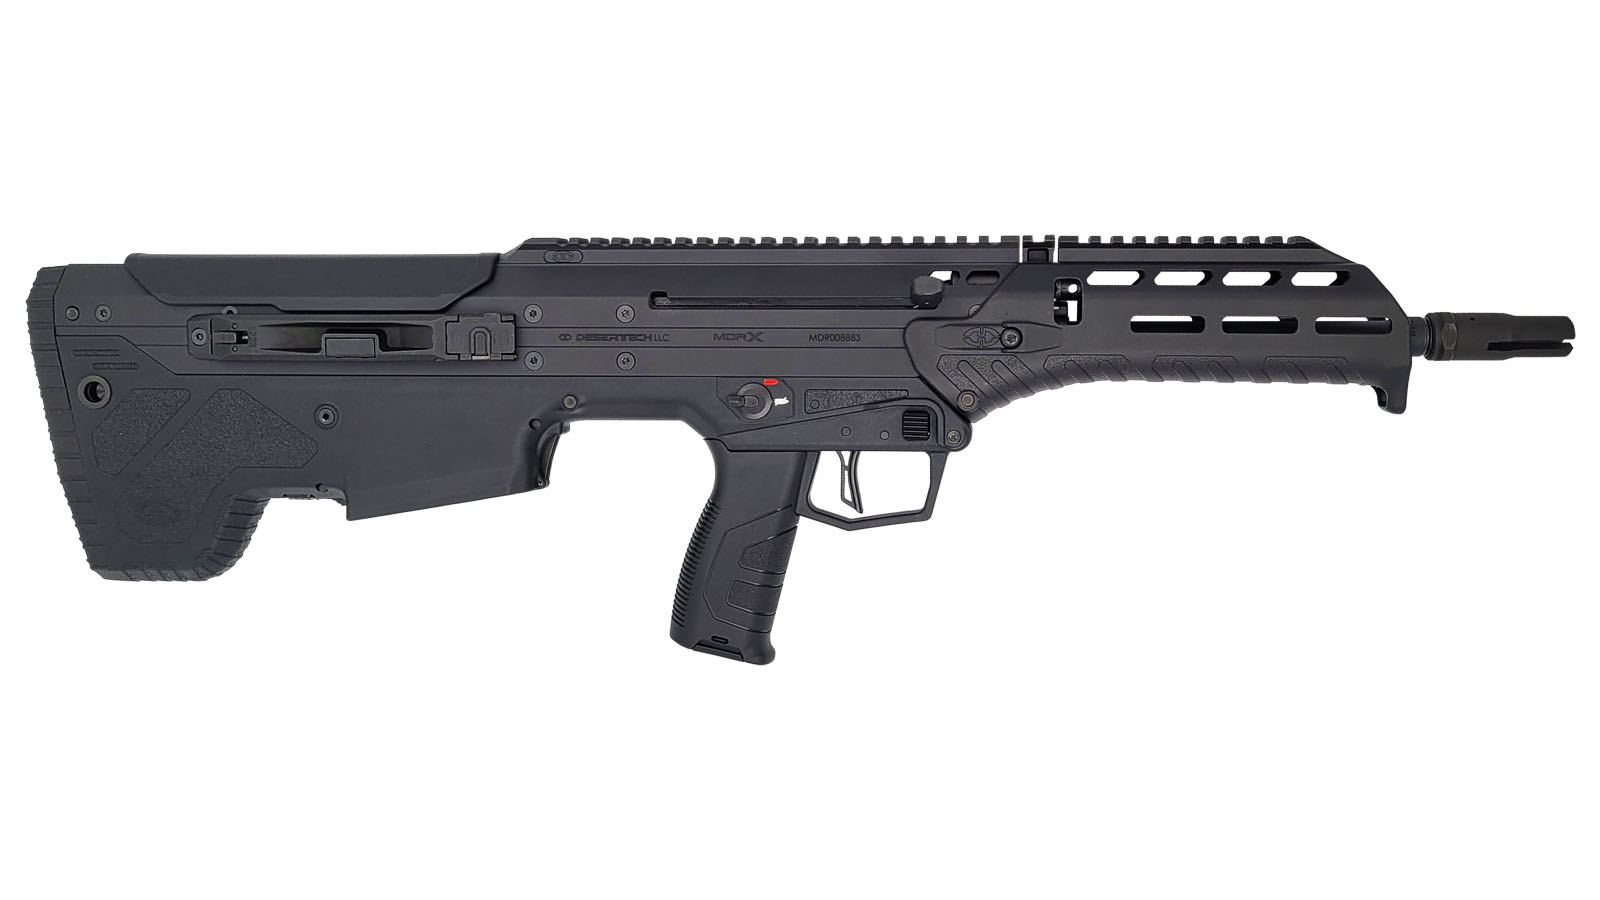 MDRx Rifle, 556NATO 223Rem 16" 30rd Forward-Ejection BLK